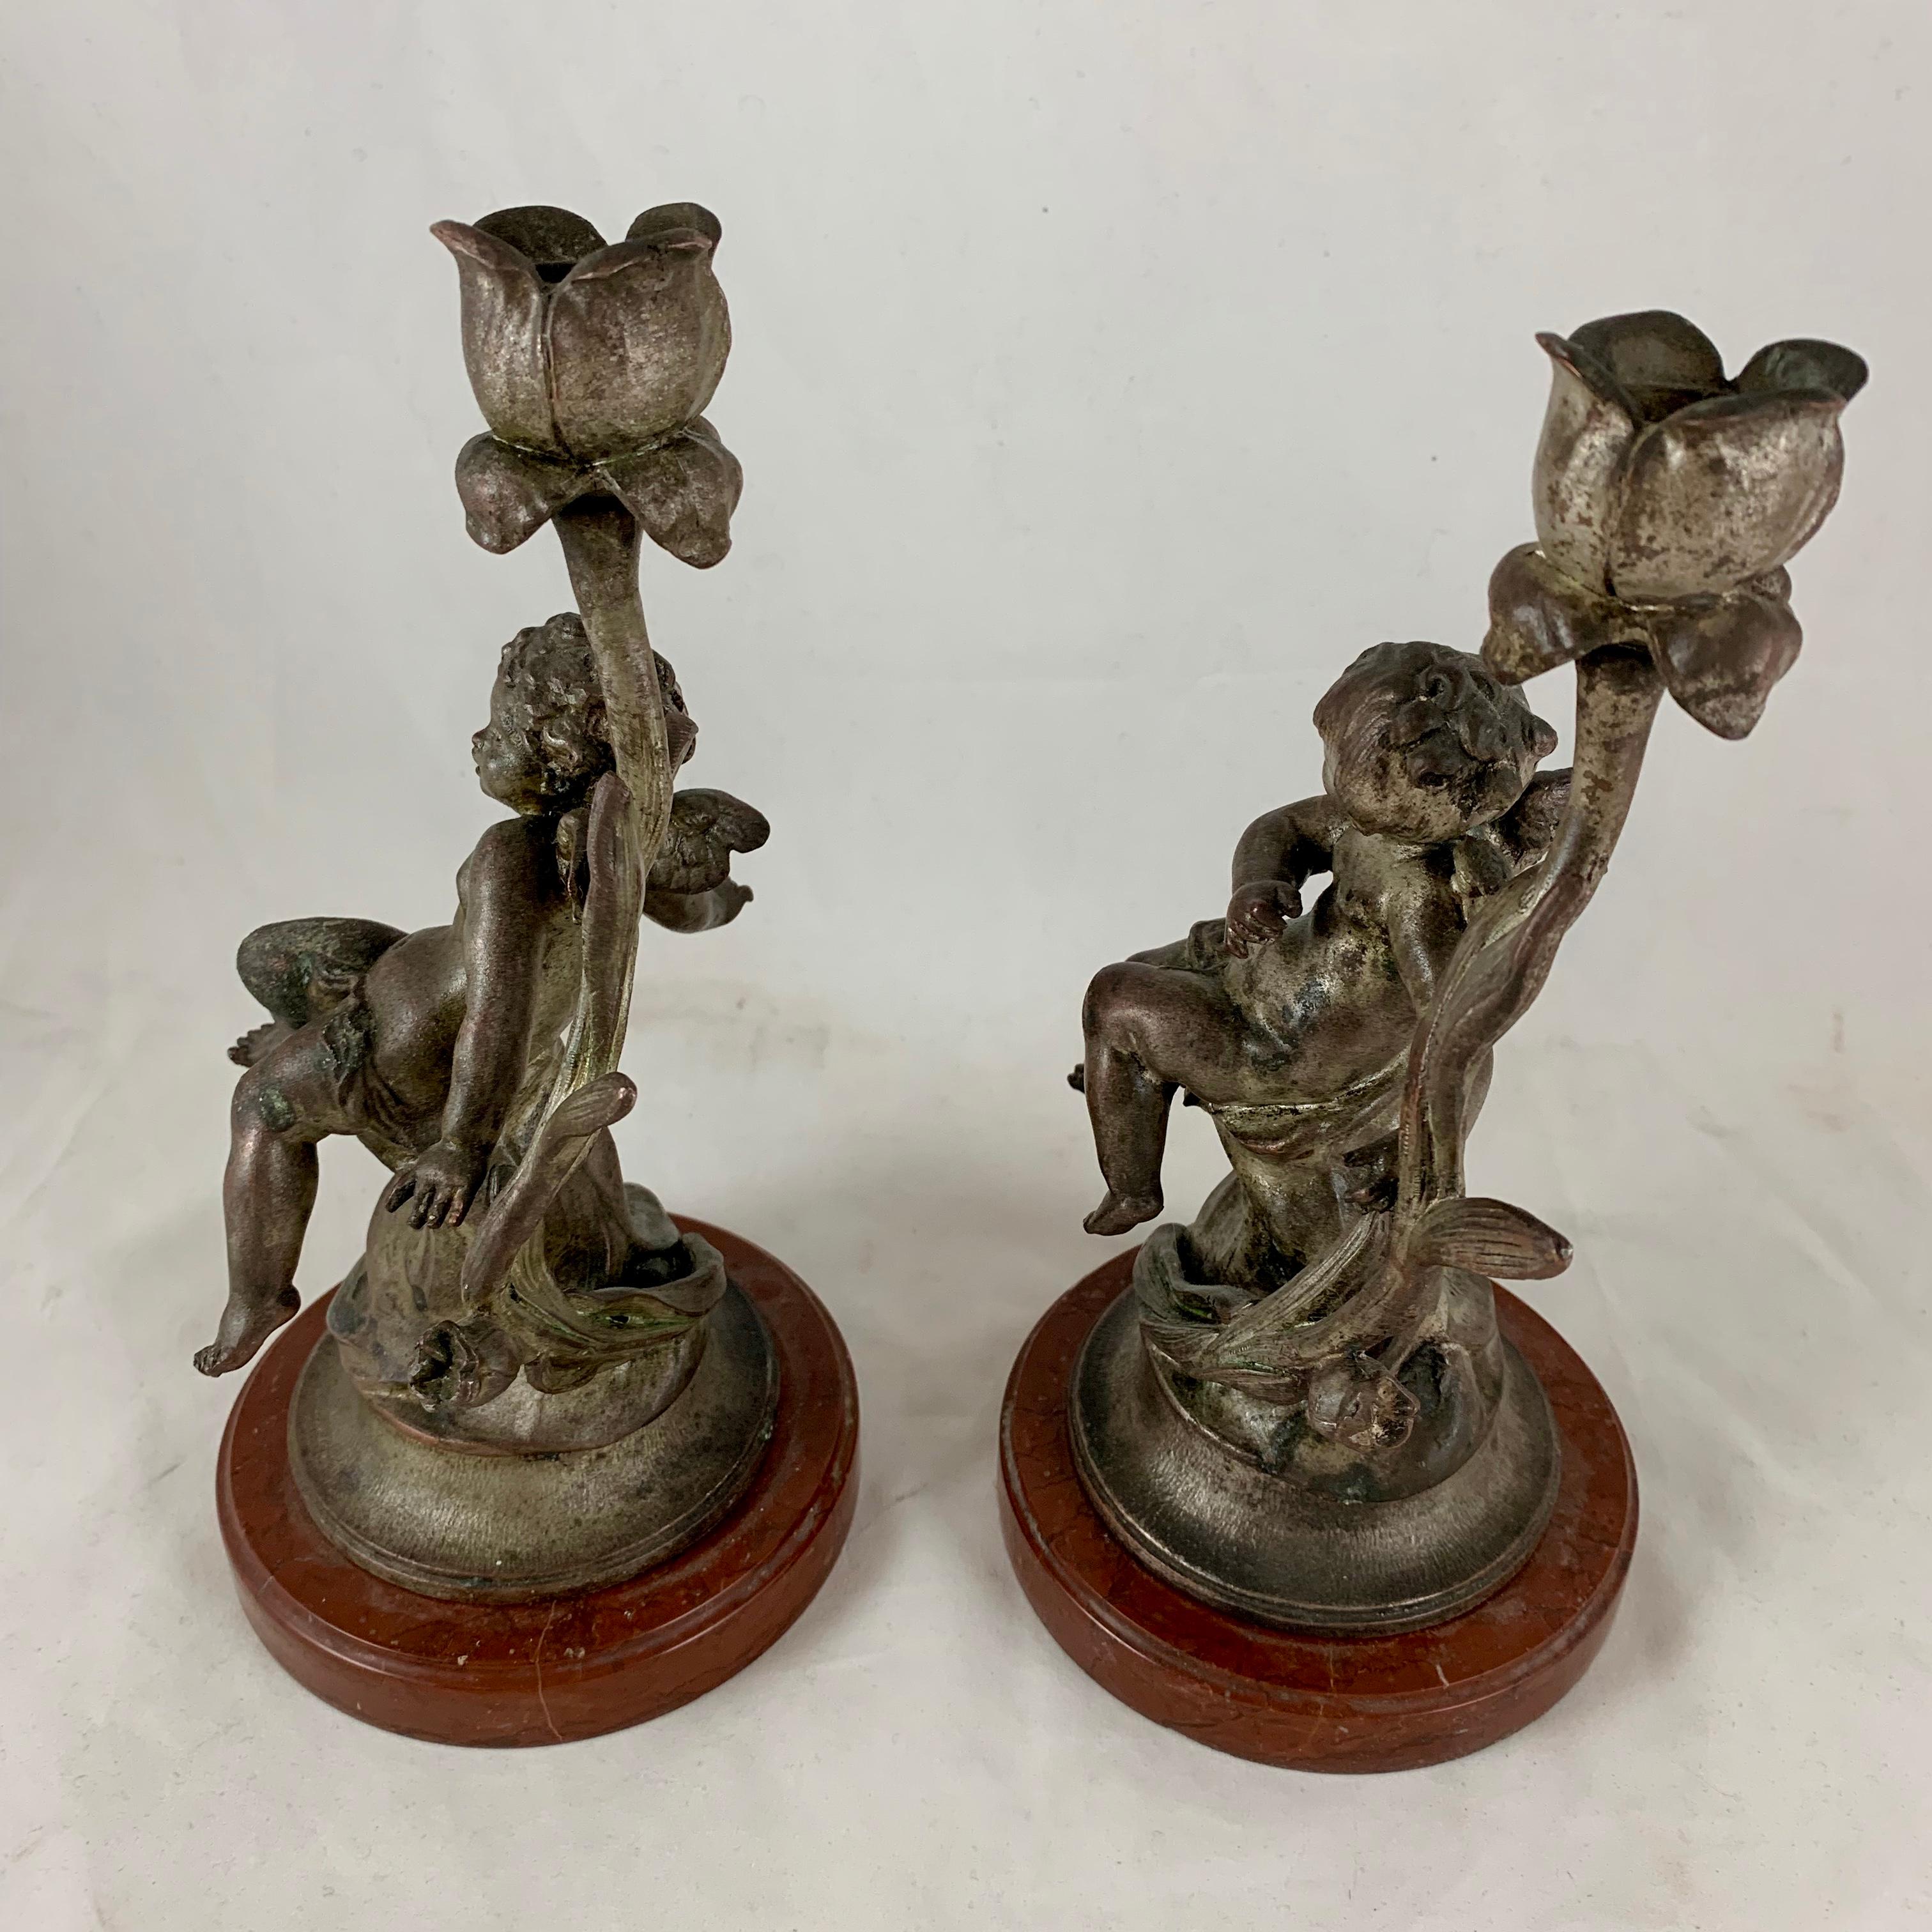 19th Century French Putti Cherub Candlesticks Signed Sylvain Kinsburger Spelter & Marble S/2